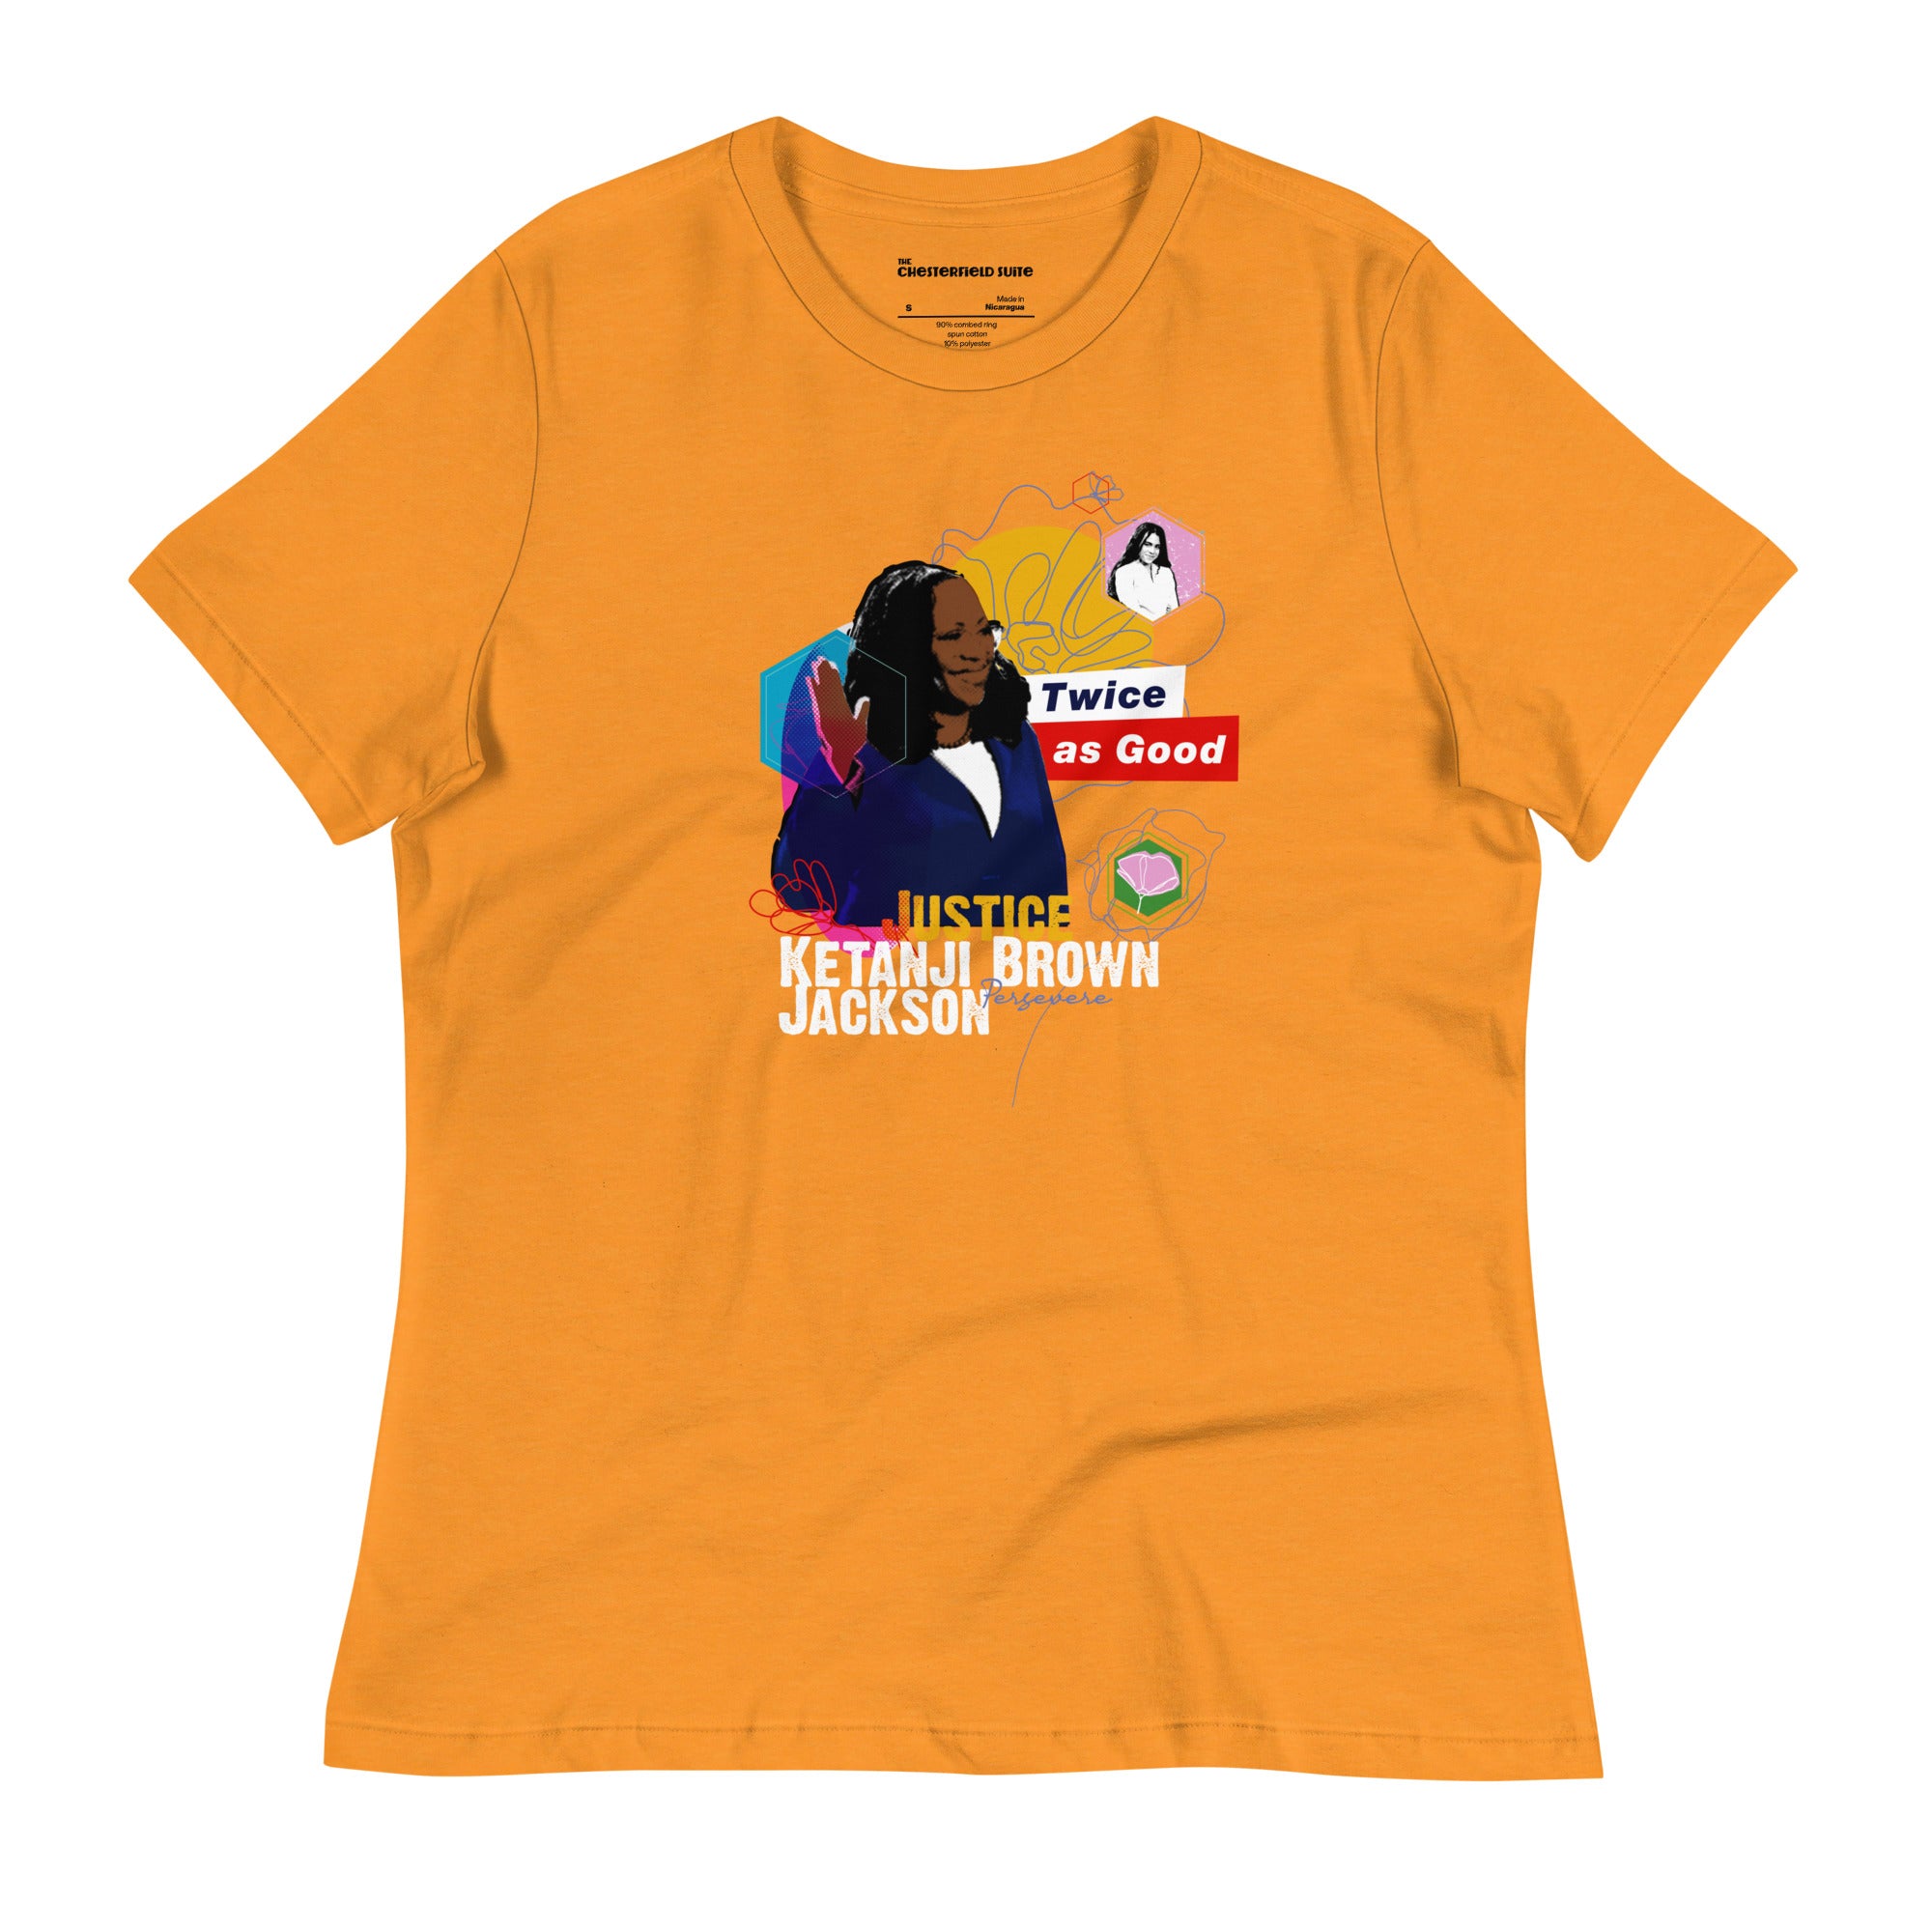 design with orange t-shirt of justice ketanji brown jackson, her daughter and the phrase "twice as good"